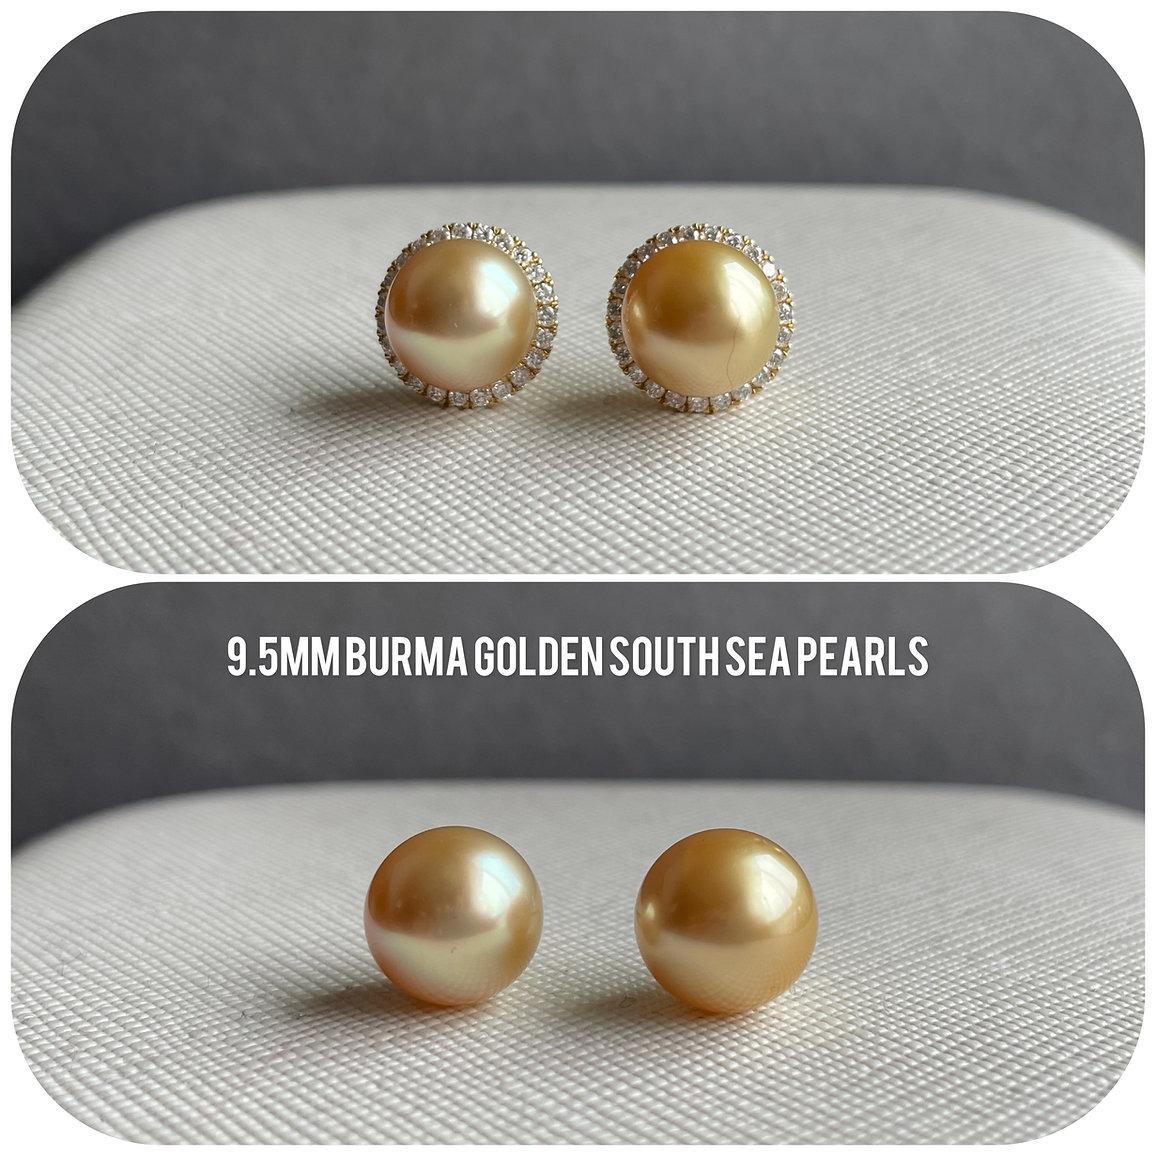 These stunning 9.5mm Golden South Sea Pearls boast a golden shade, are fully round with high luster, making them even more desirable. You can wear them as versatile studs for a gentle look or enhance their elegance with a diamond halo jacket for a